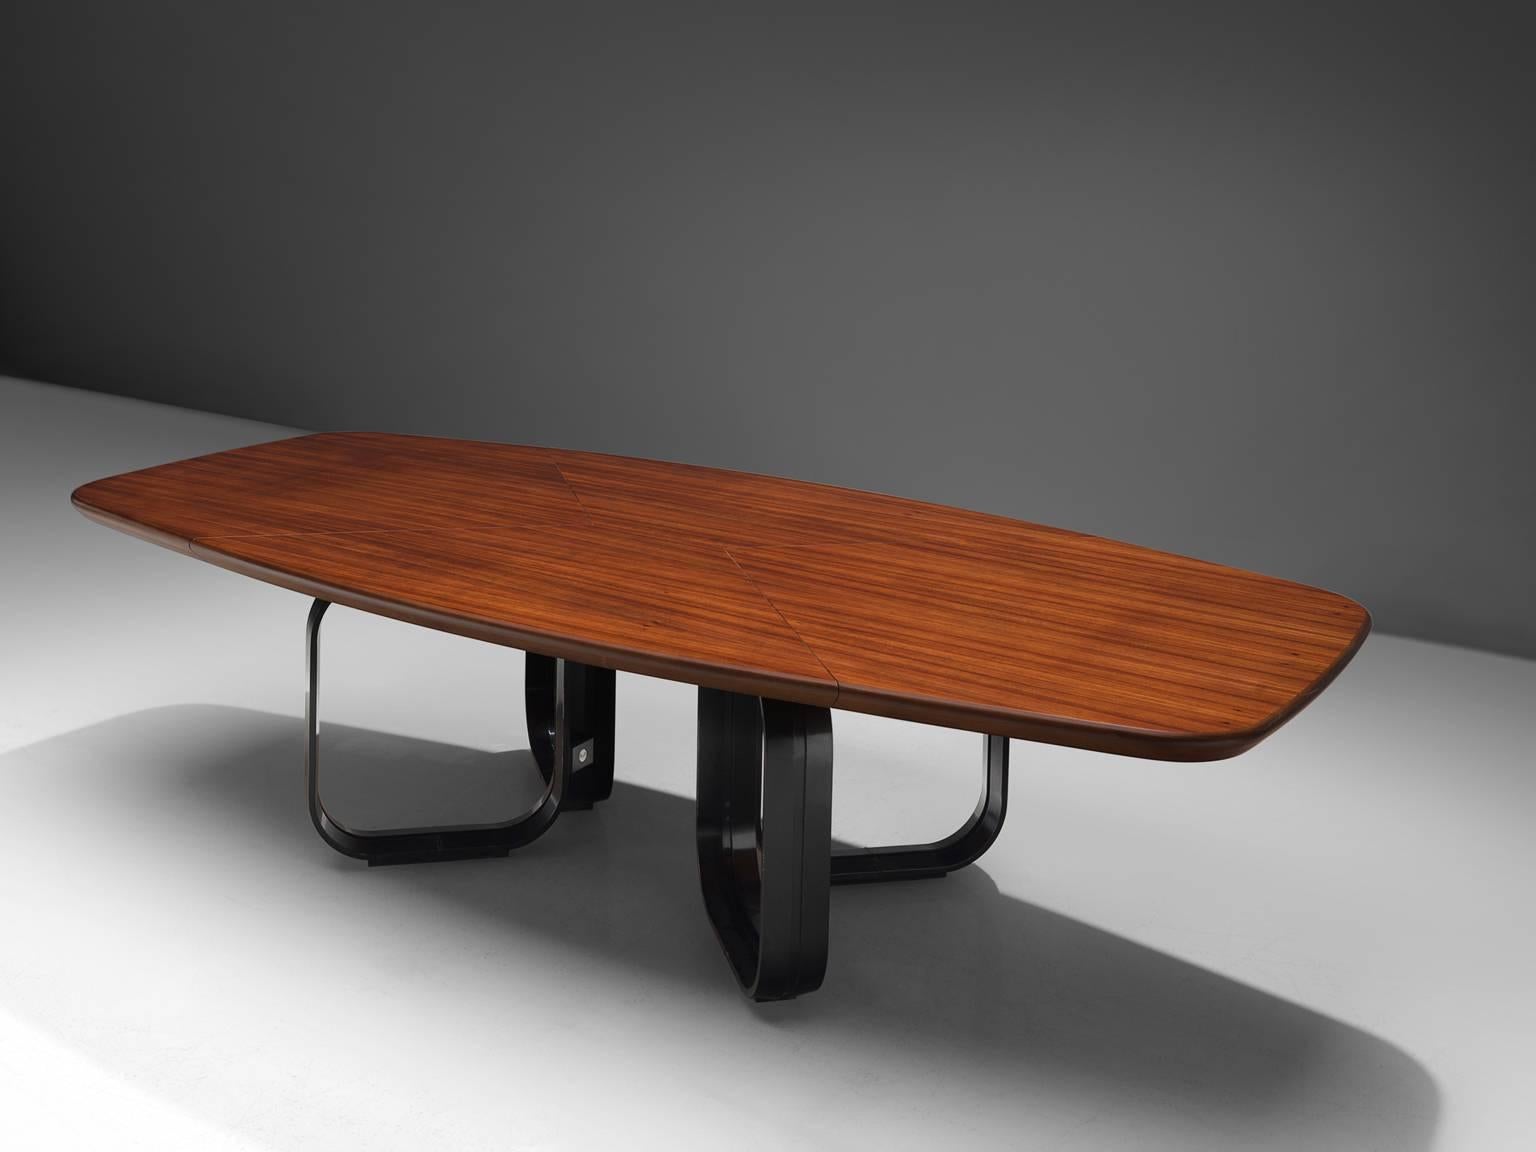 MIM Roma, conference table in rosewood and black metal, Italy, 1960s. Measure: 3mt/120ft

This boat shaped table with a rosewood top is designed and executed by the MIM design team. The rosewood veneer shows a nice patina and the table has a